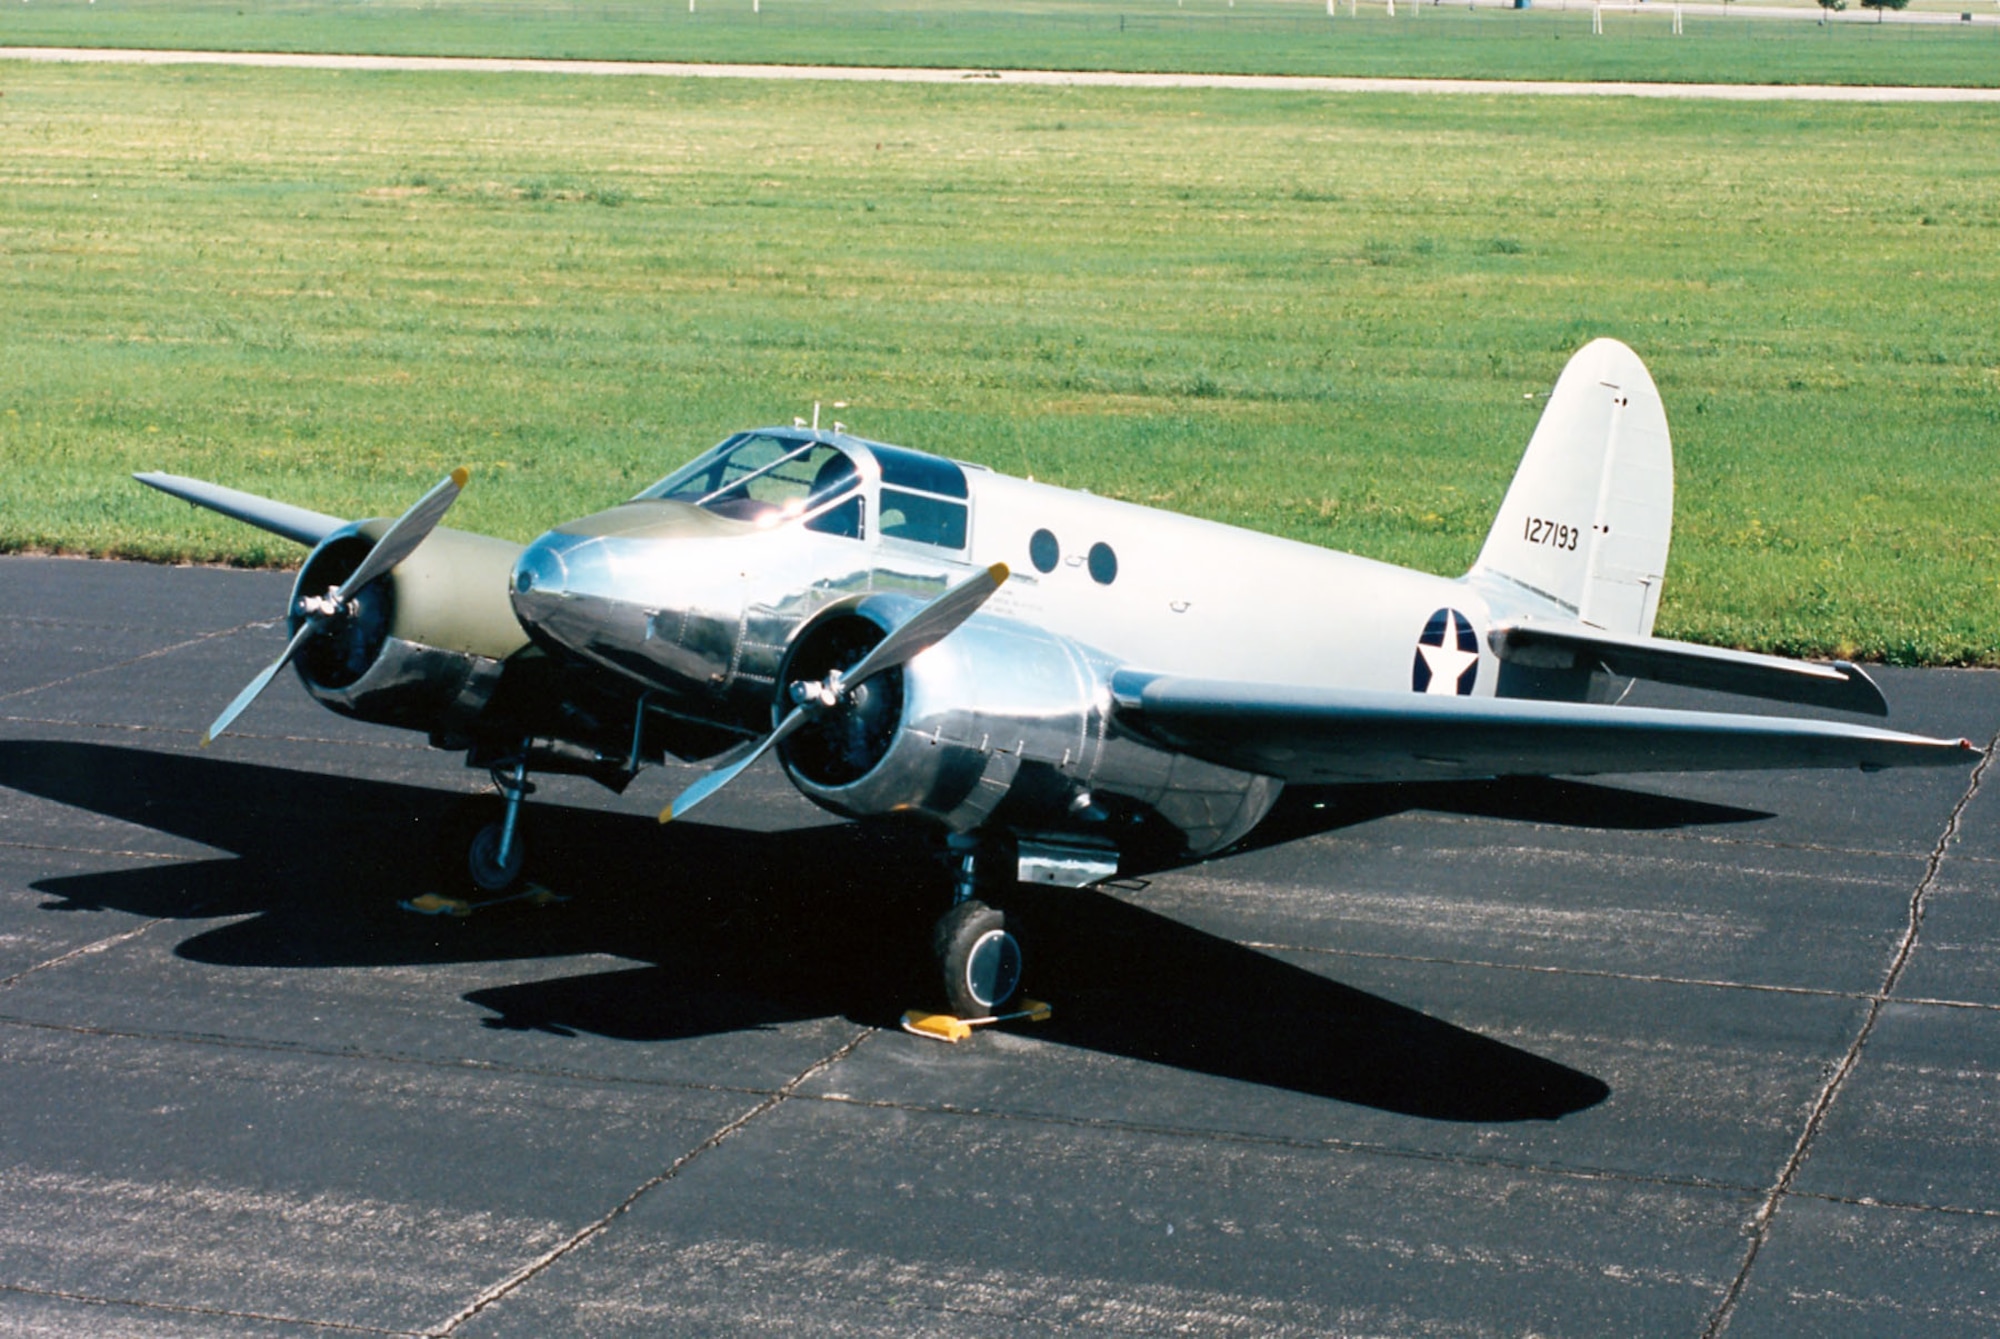 DAYTON, Ohio -- Beech AT-10 Wichita at the National Museum of the United States Air Force. (U.S. Air Force photo)